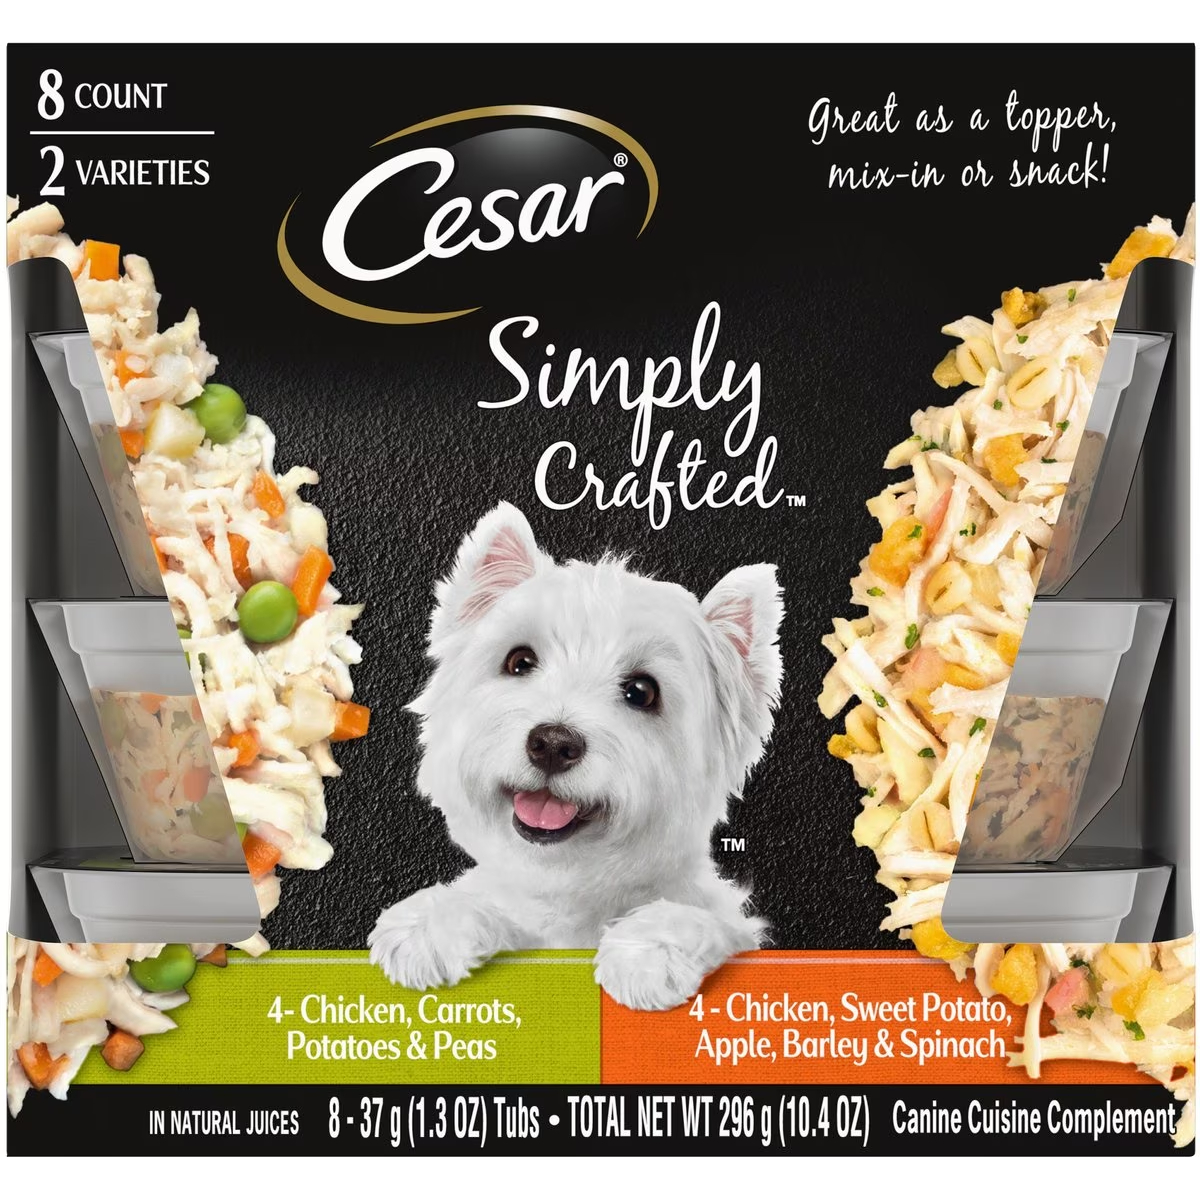 Cesar Simply Crafted Variety Pack Chicken, Carrots, Potatoes & Peas & Chicken, Sweet Potato, Apple, Barley & Spinach Limited-Ingredient Wet Dog Food Topper